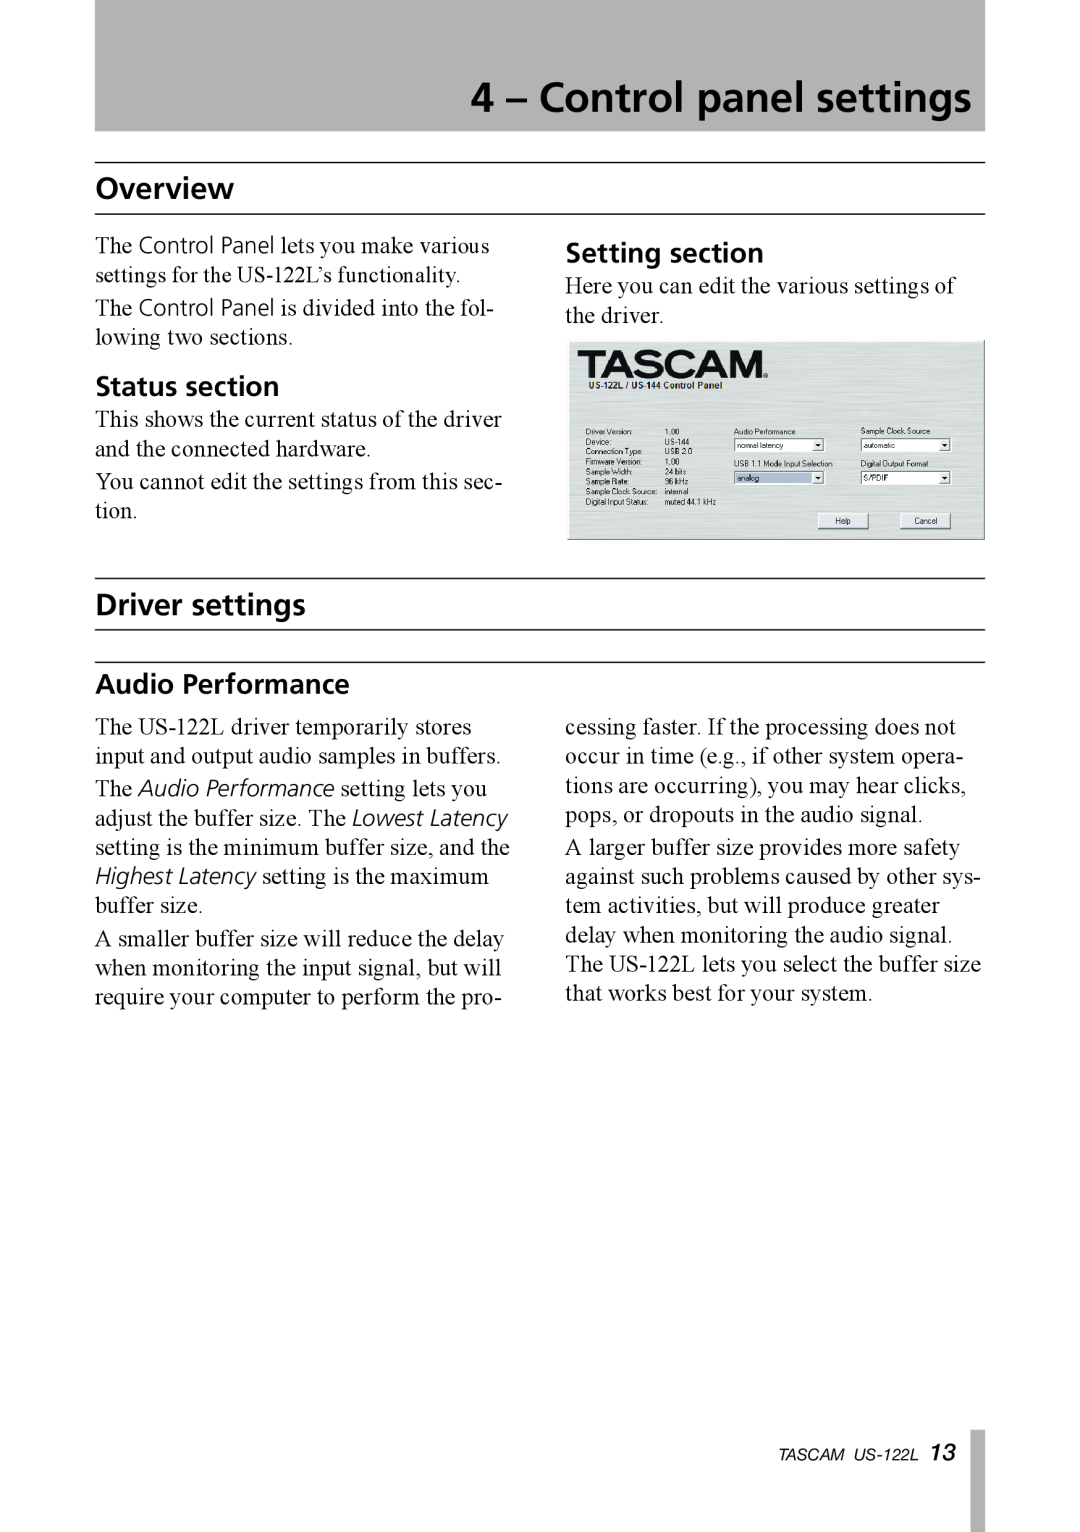 Tascam US-122L Control panel settings, Driver settings, Status section, Setting section, Audio Performance, Overview 